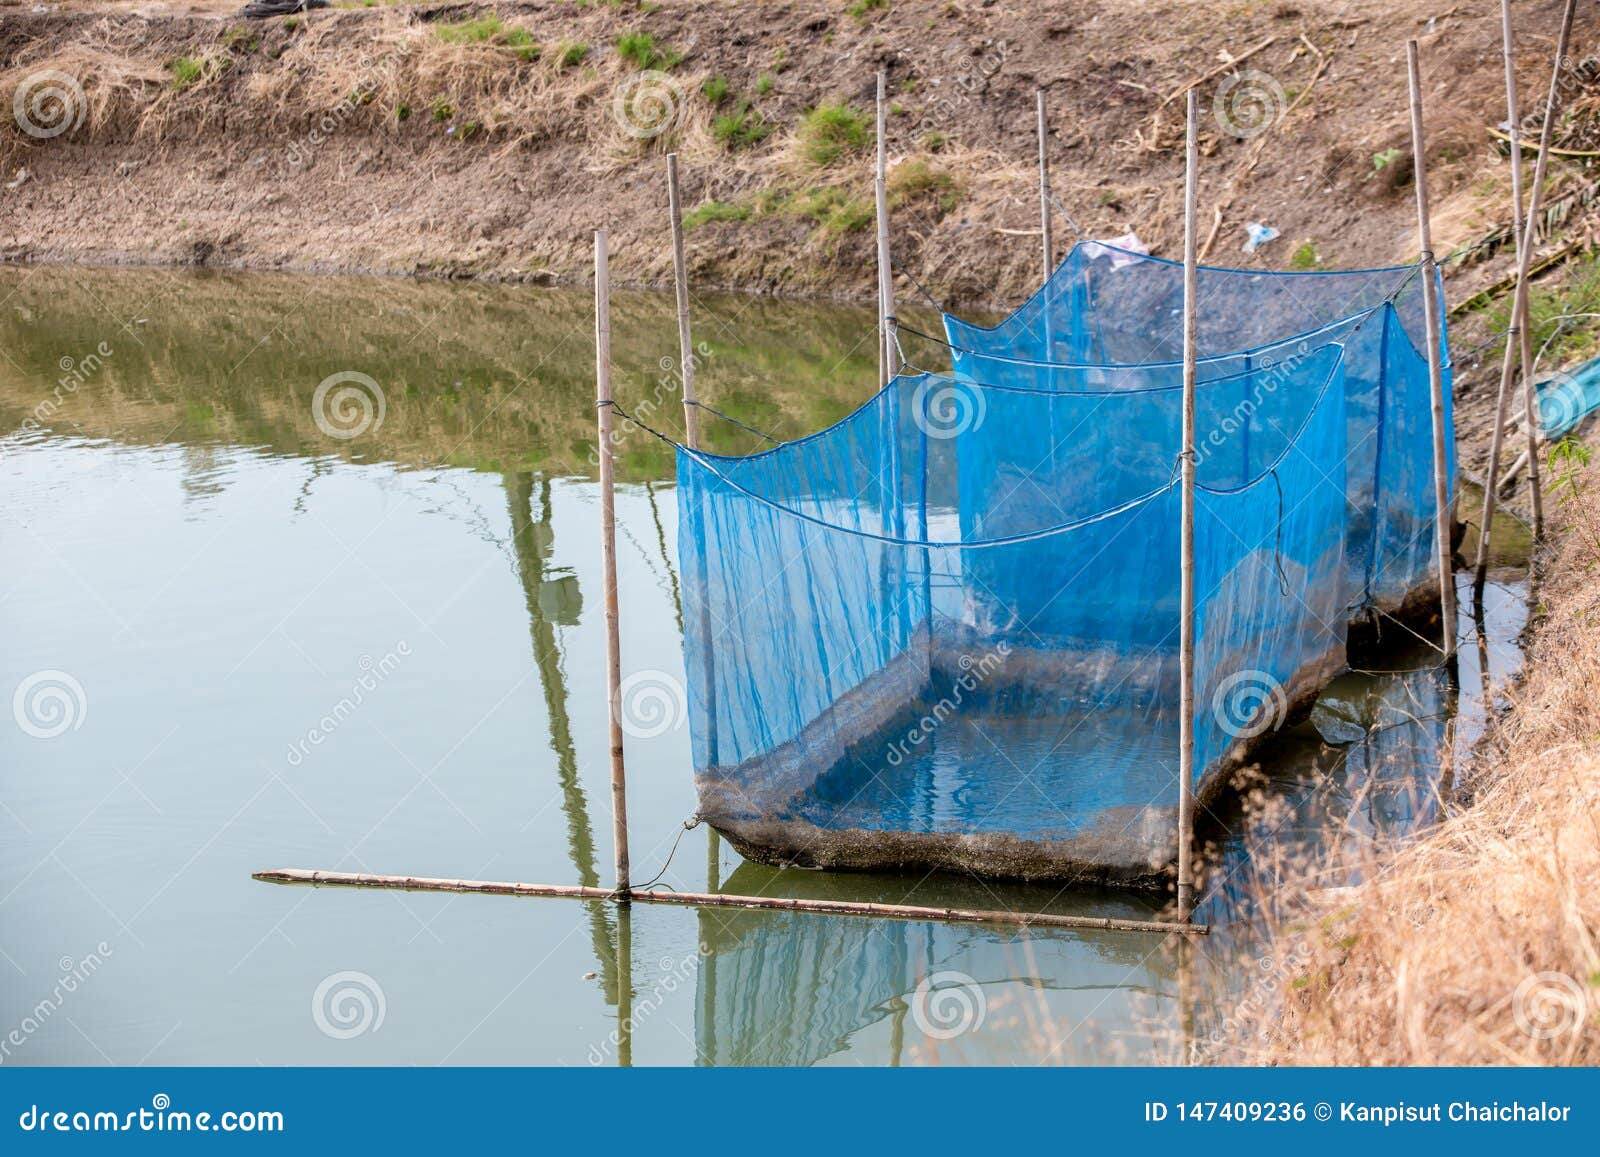 Fish Cage Floating in River Use for Raising Fish, Built with Blue Plastic  Barrels, Iron Pipes, Wood Planks and Net. Stock Photo - Image of fresh,  fishery: 147409236